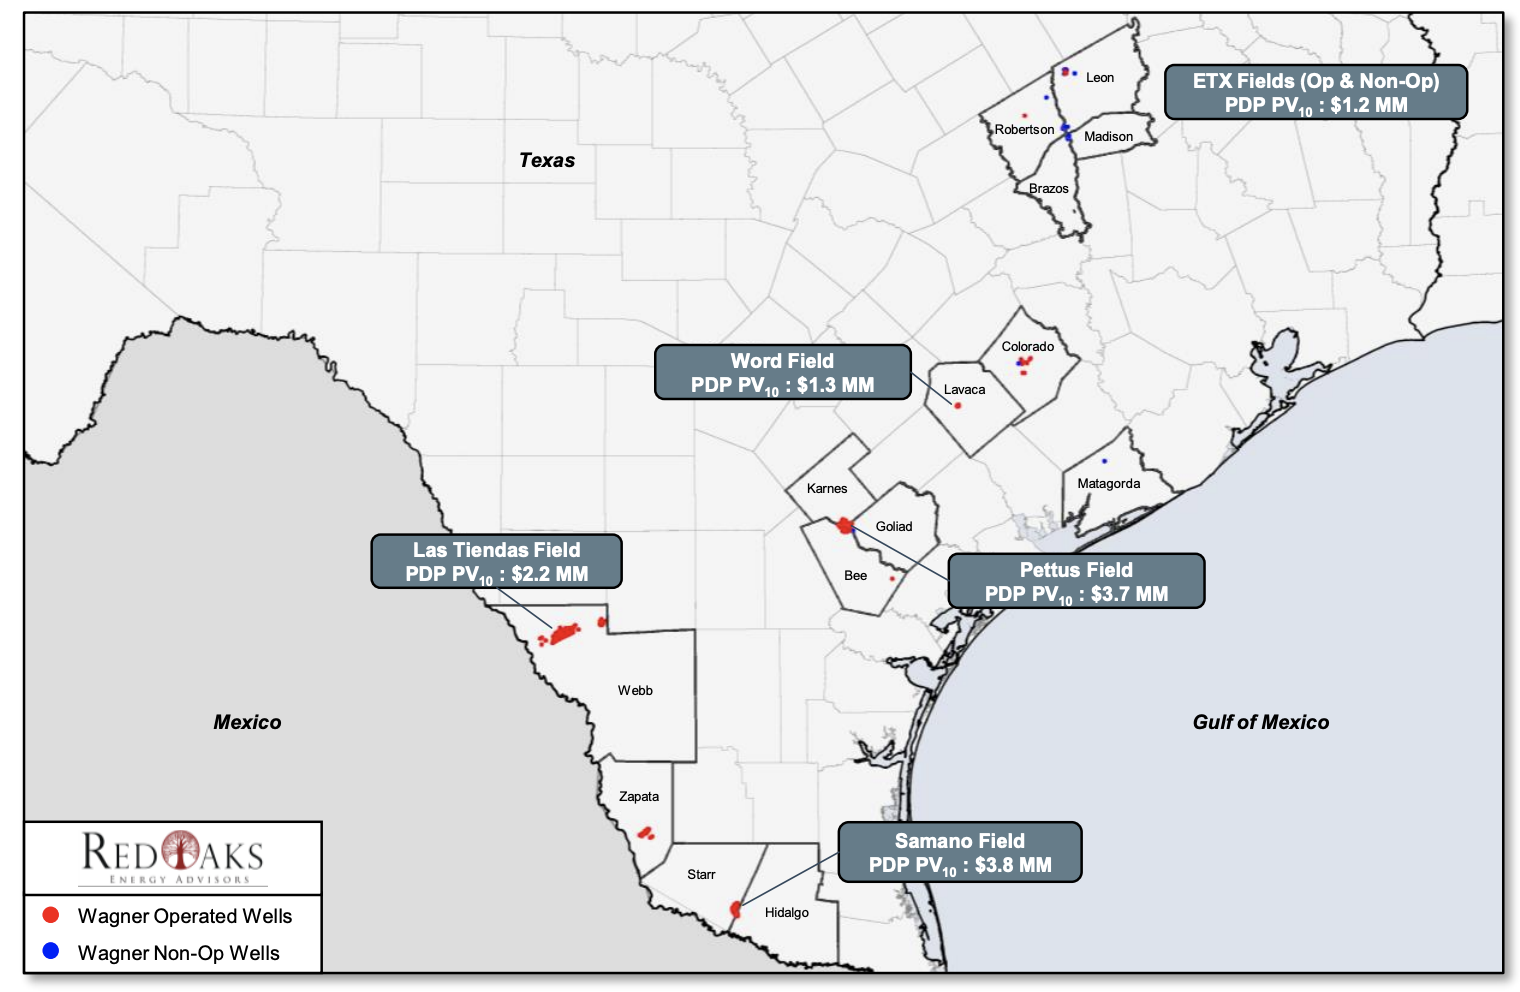 Marketed: Wagner Oil South Texas, East Texas Package